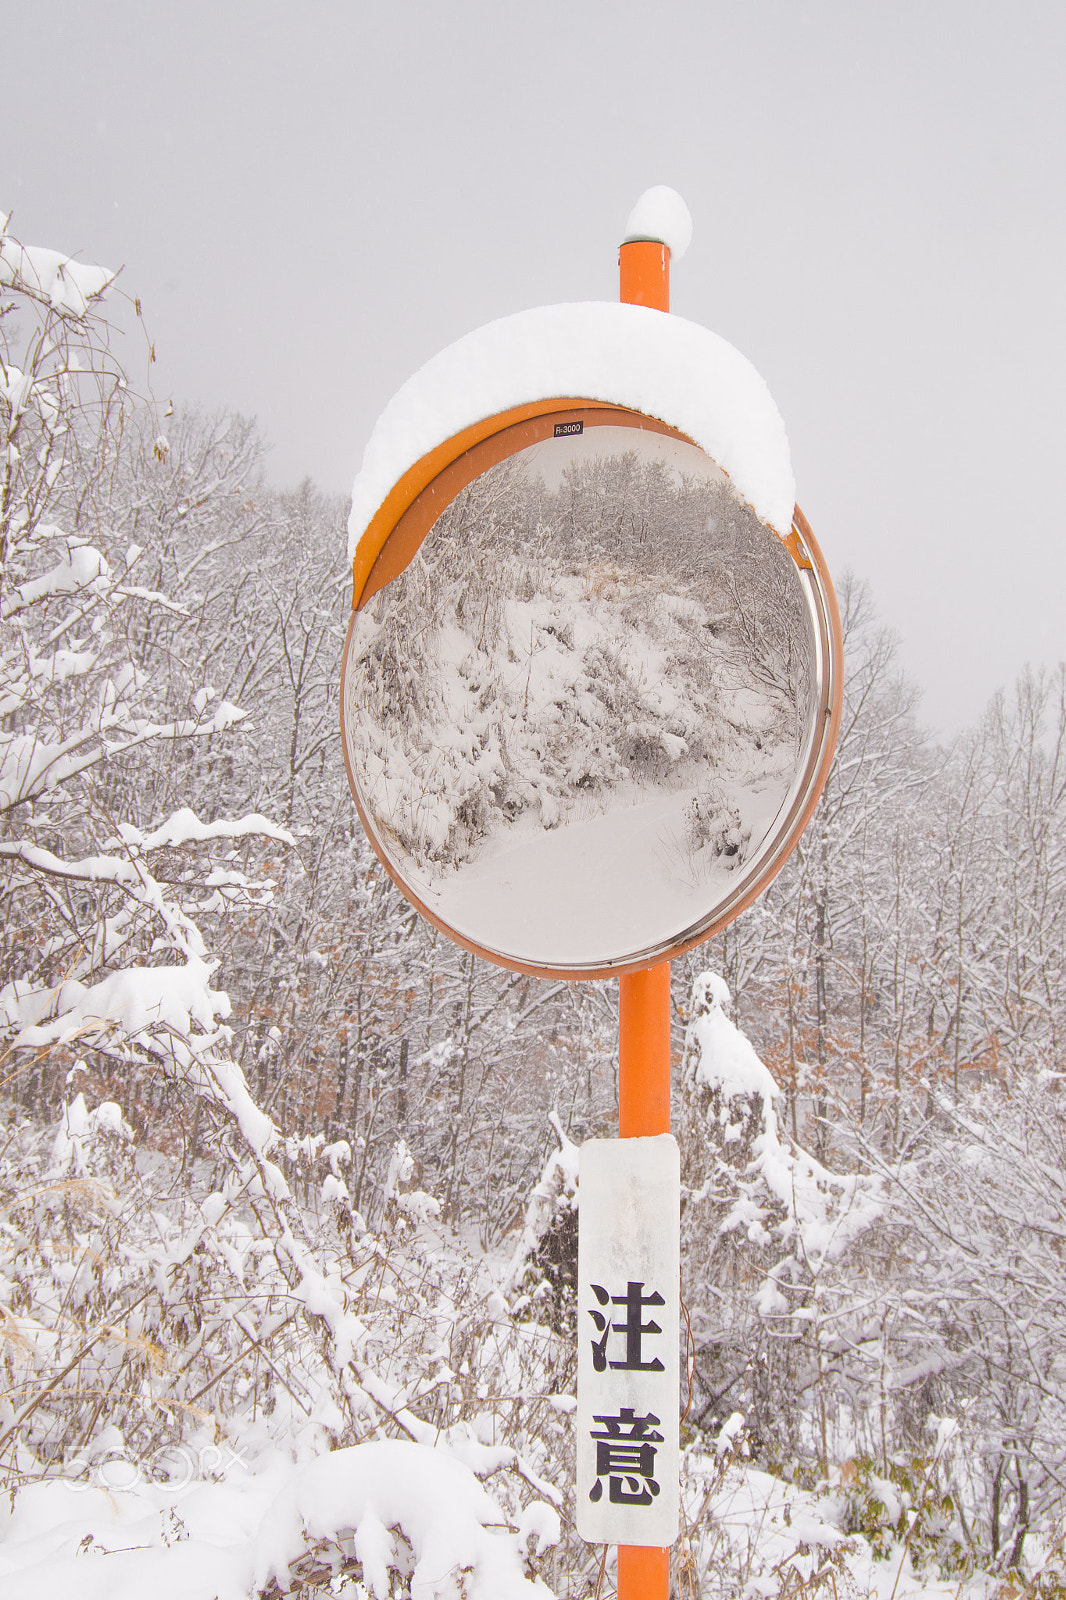 Pentax K-S2 sample photo. In the mirror, after all the snowy world photography